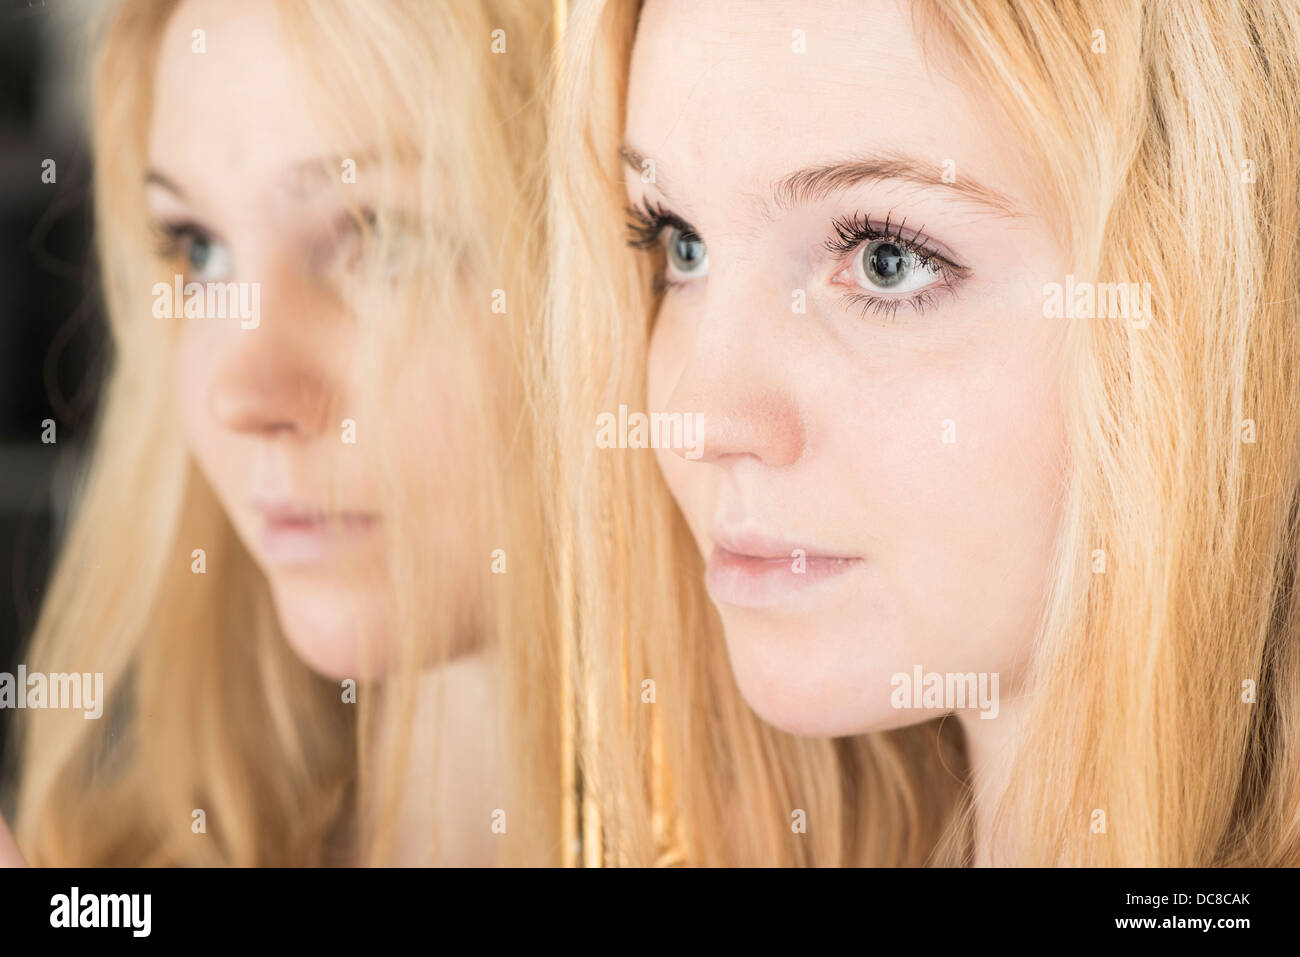 Portrait of young blond female teenager standing by mirror looking sad Stock Photo